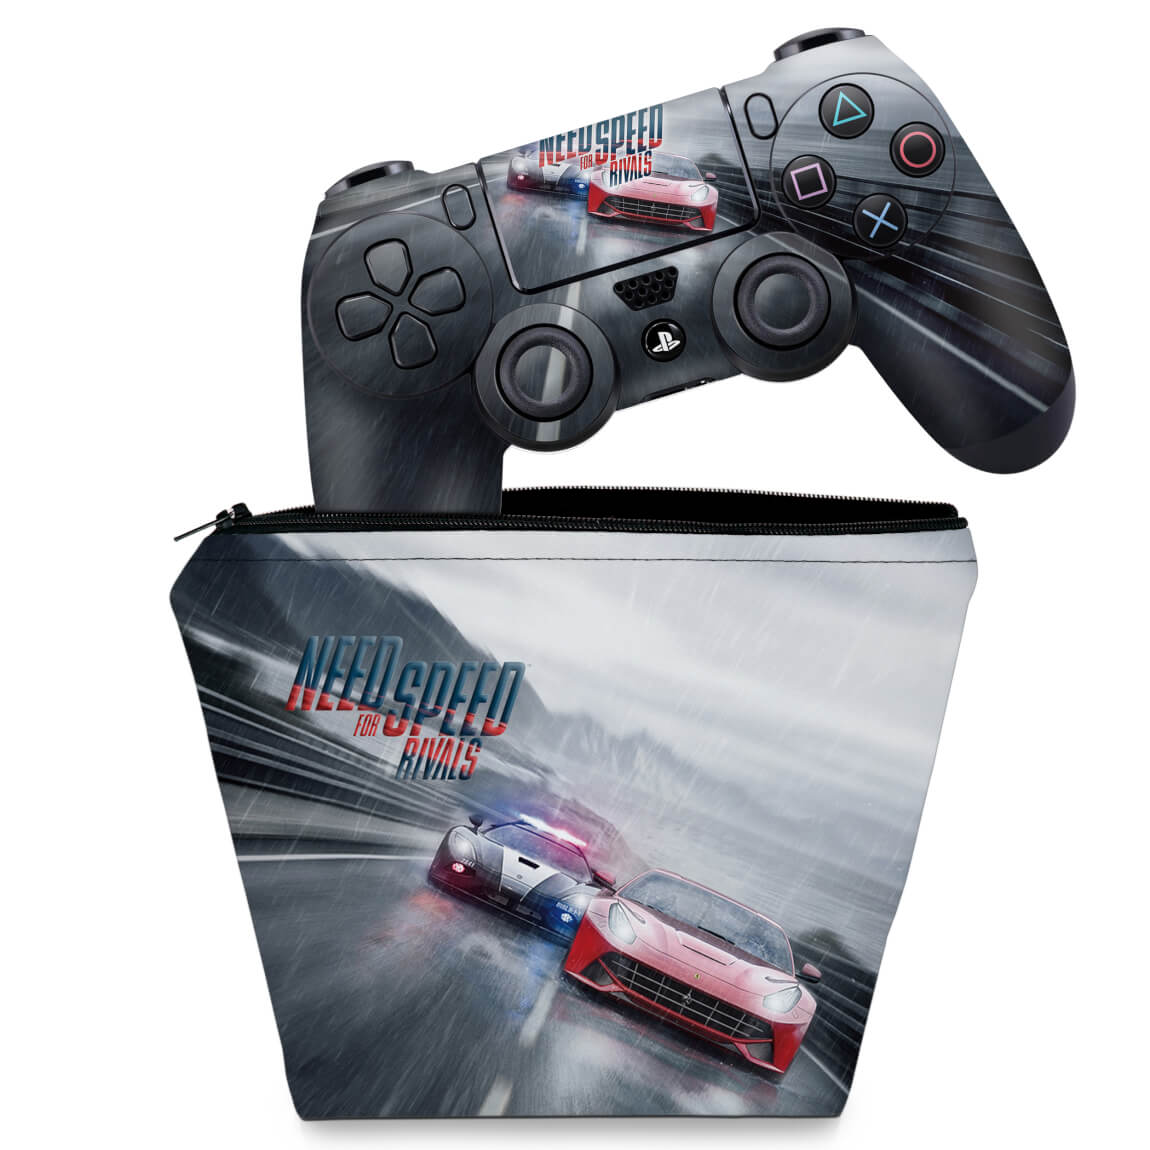 KIT Capa Case e Skin PS4 Controle - Need For Speed Rivals - Pop Arte Skins